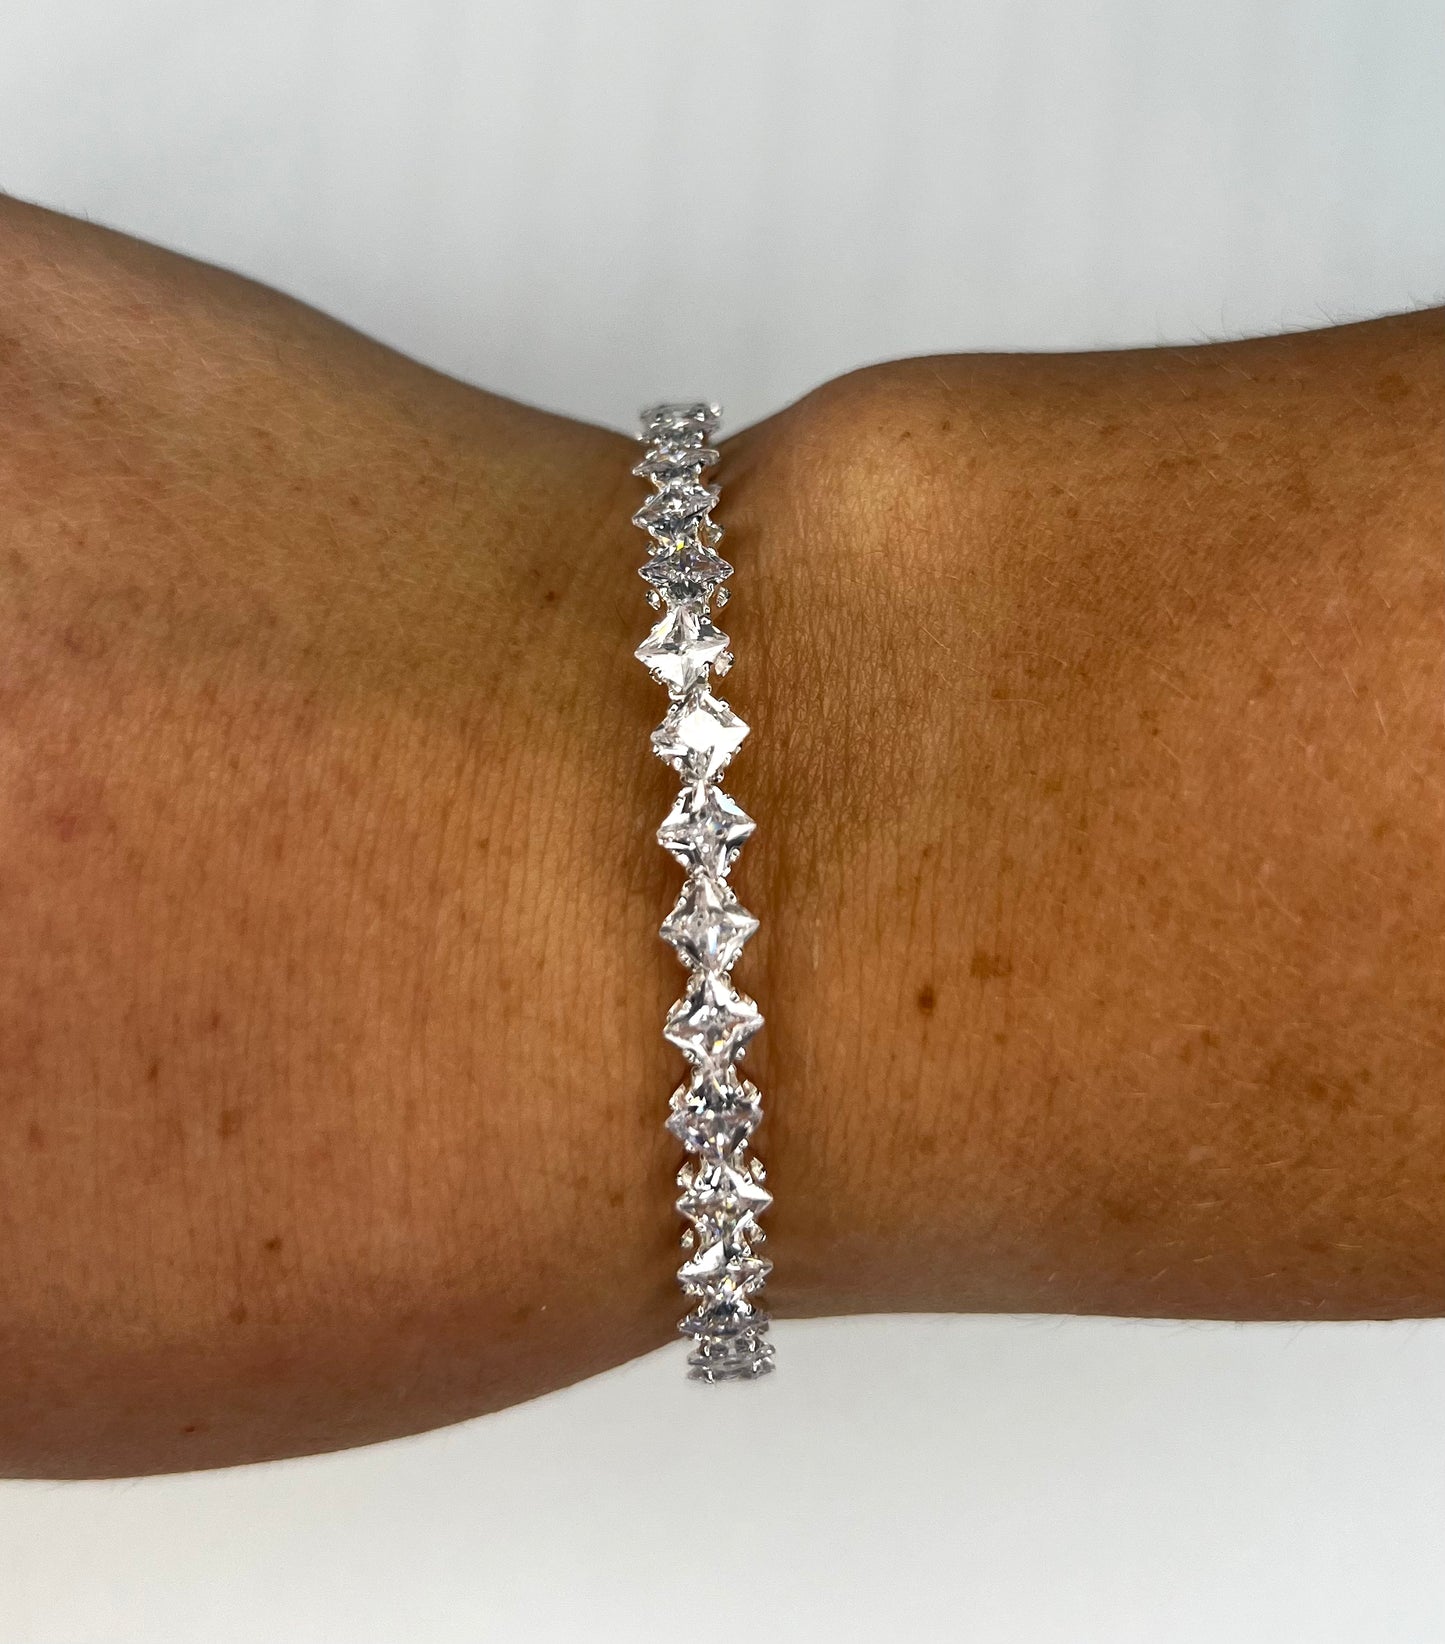 Our Cuff Bangles are the perfect accessory to complete any look. Crafted in silver, they come in a variety of styles to fit any wardrobe. They are also adjustable to ensure the perfect fit.